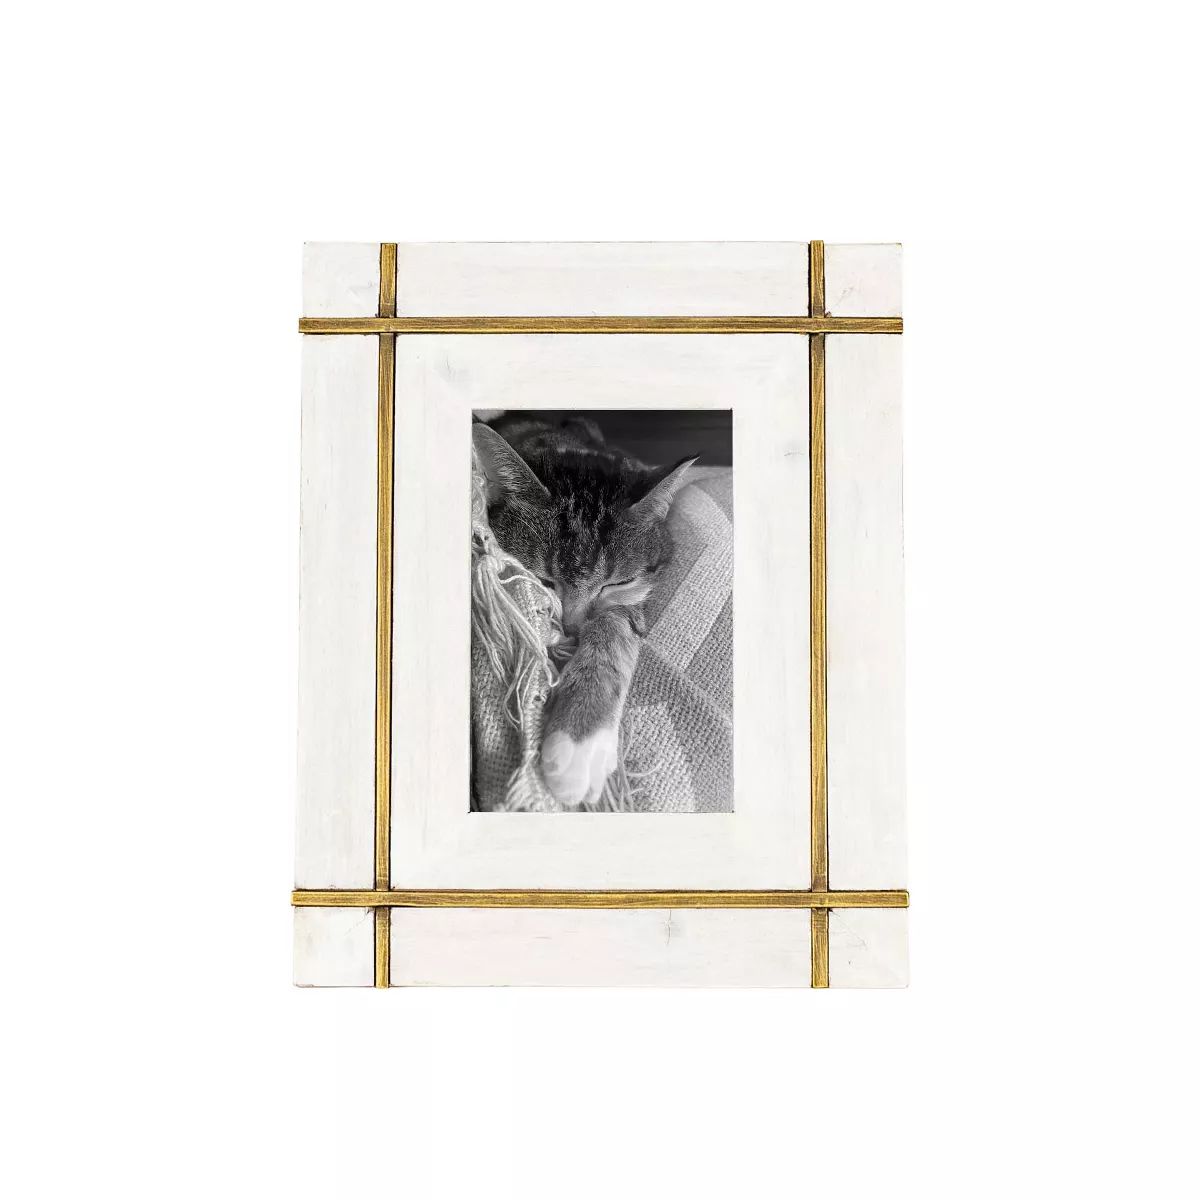 4x6 Inch Bordered Picture Frame White Wood, MDF, Metal & Glass by Foreside Home & Garden | Target